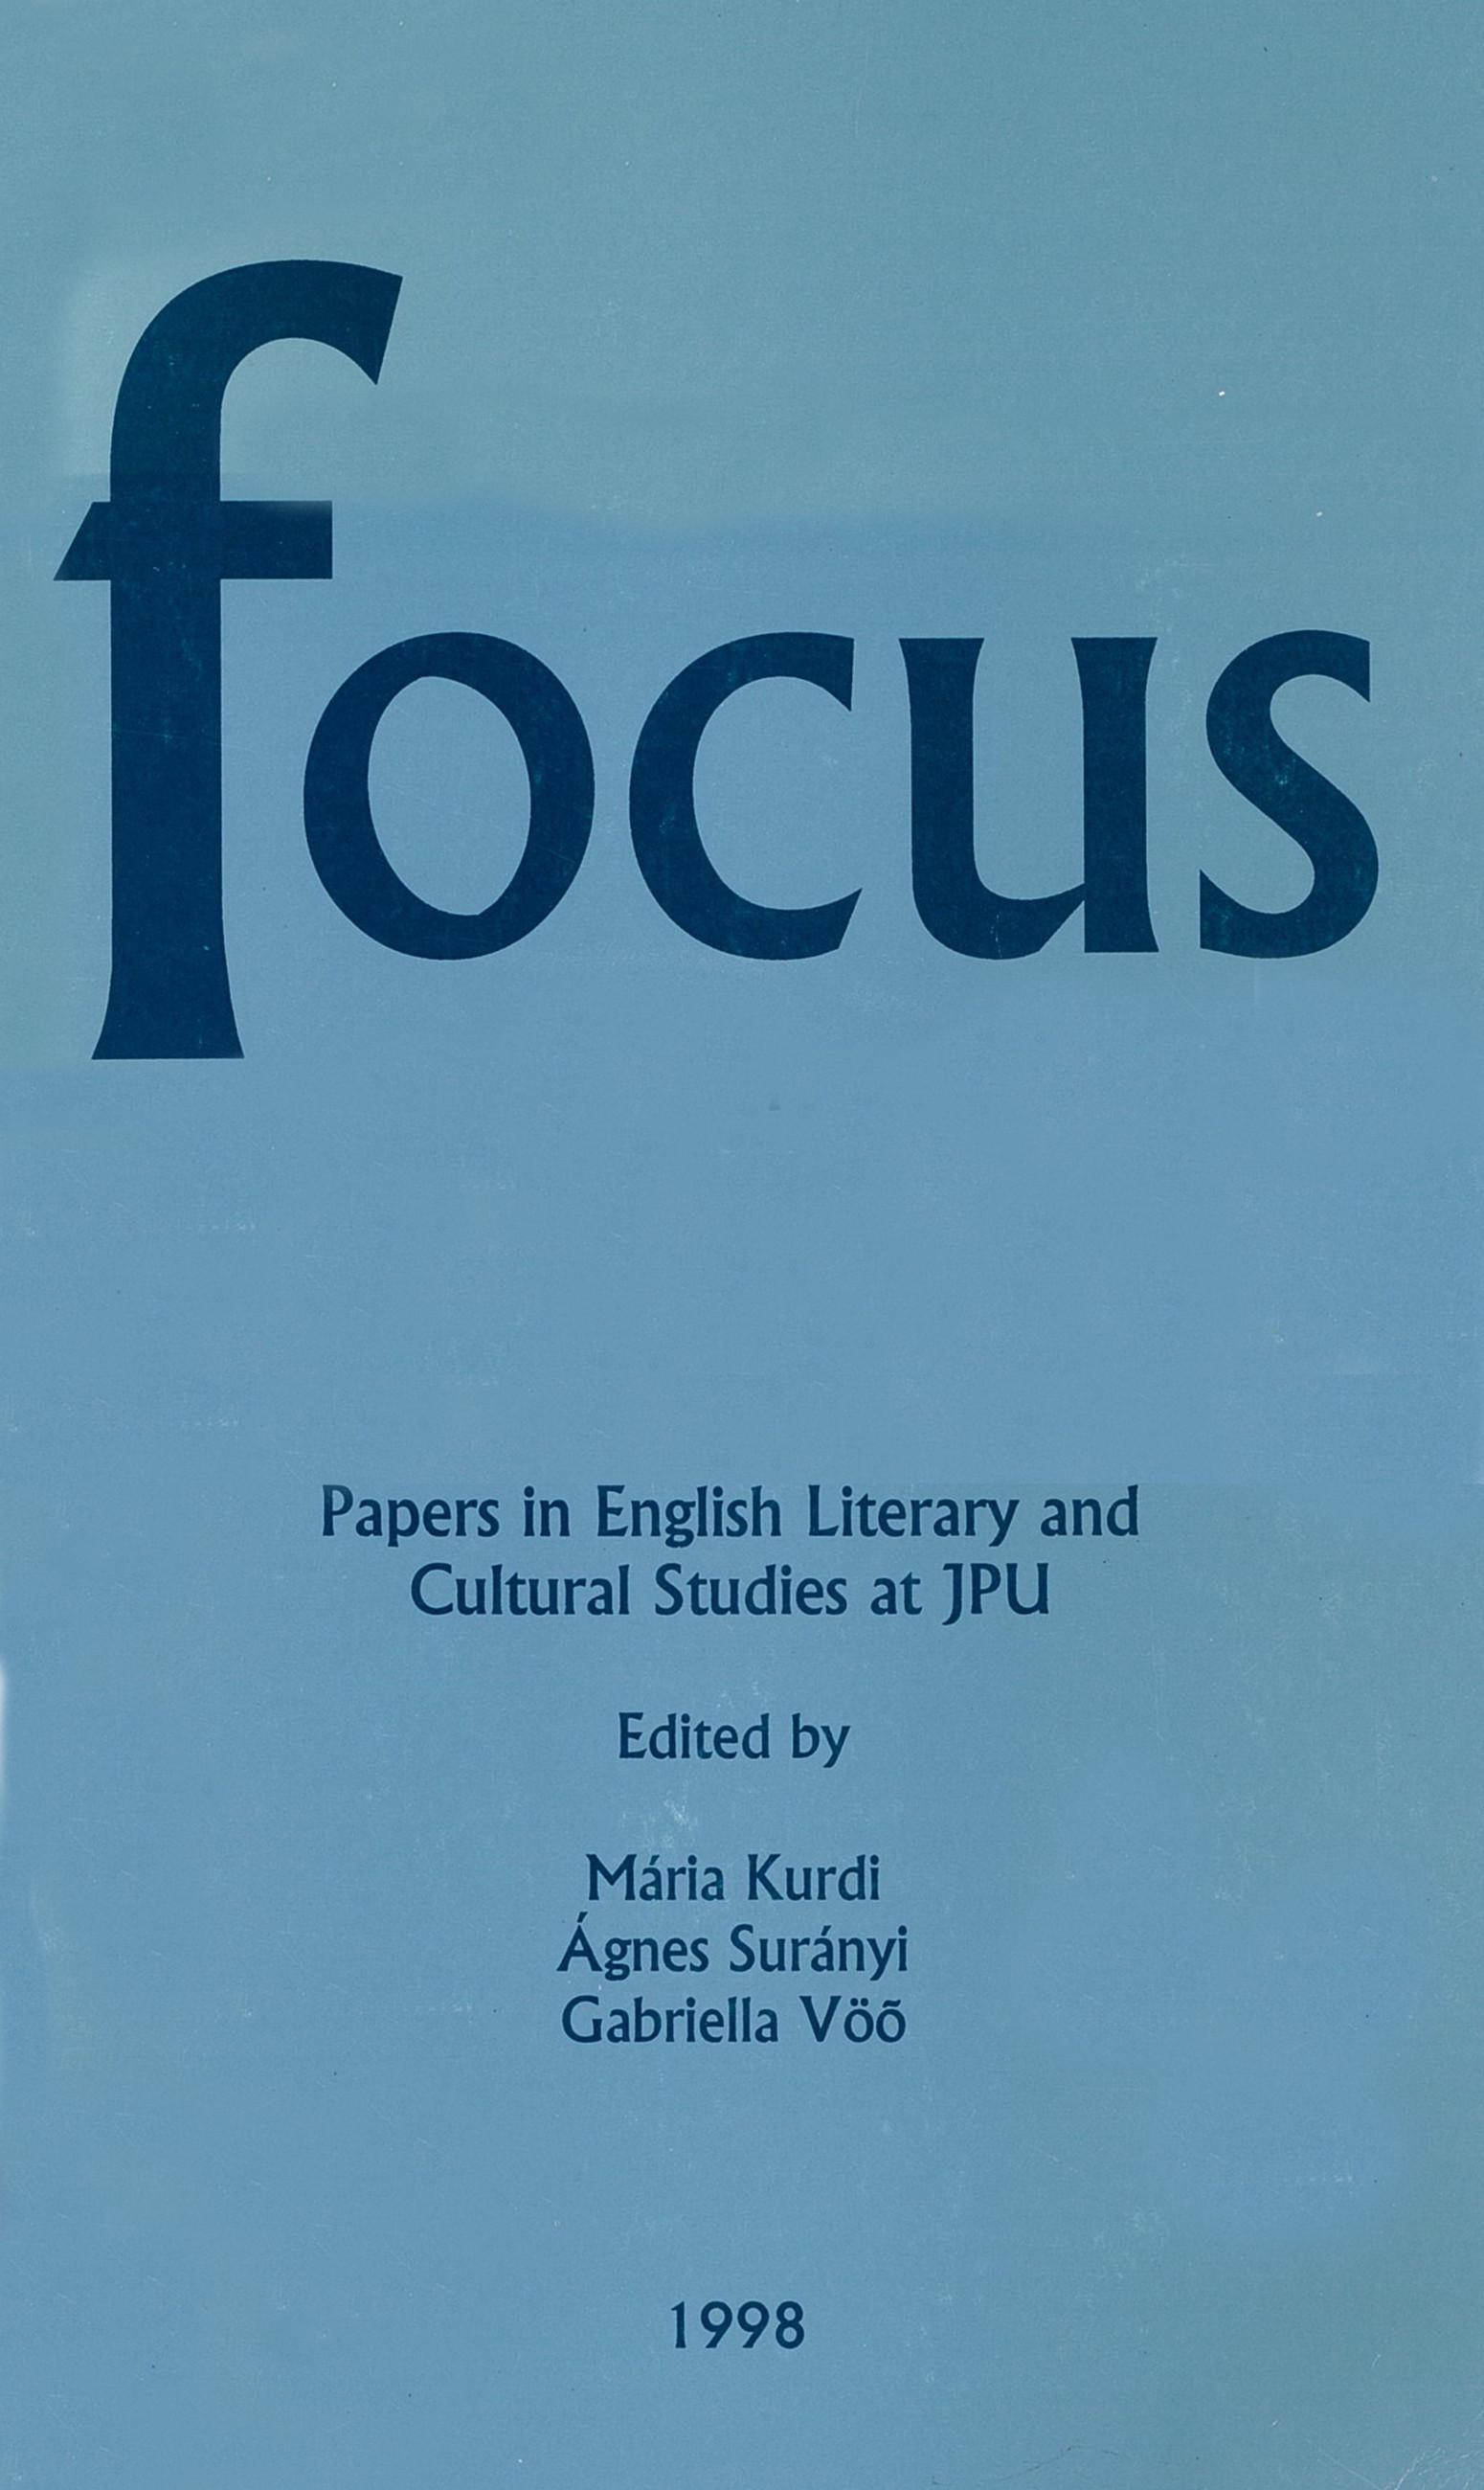 					View Vol. 1 No. 1 (1998): Papers in English Literary and Cultural Studies at JPU
				